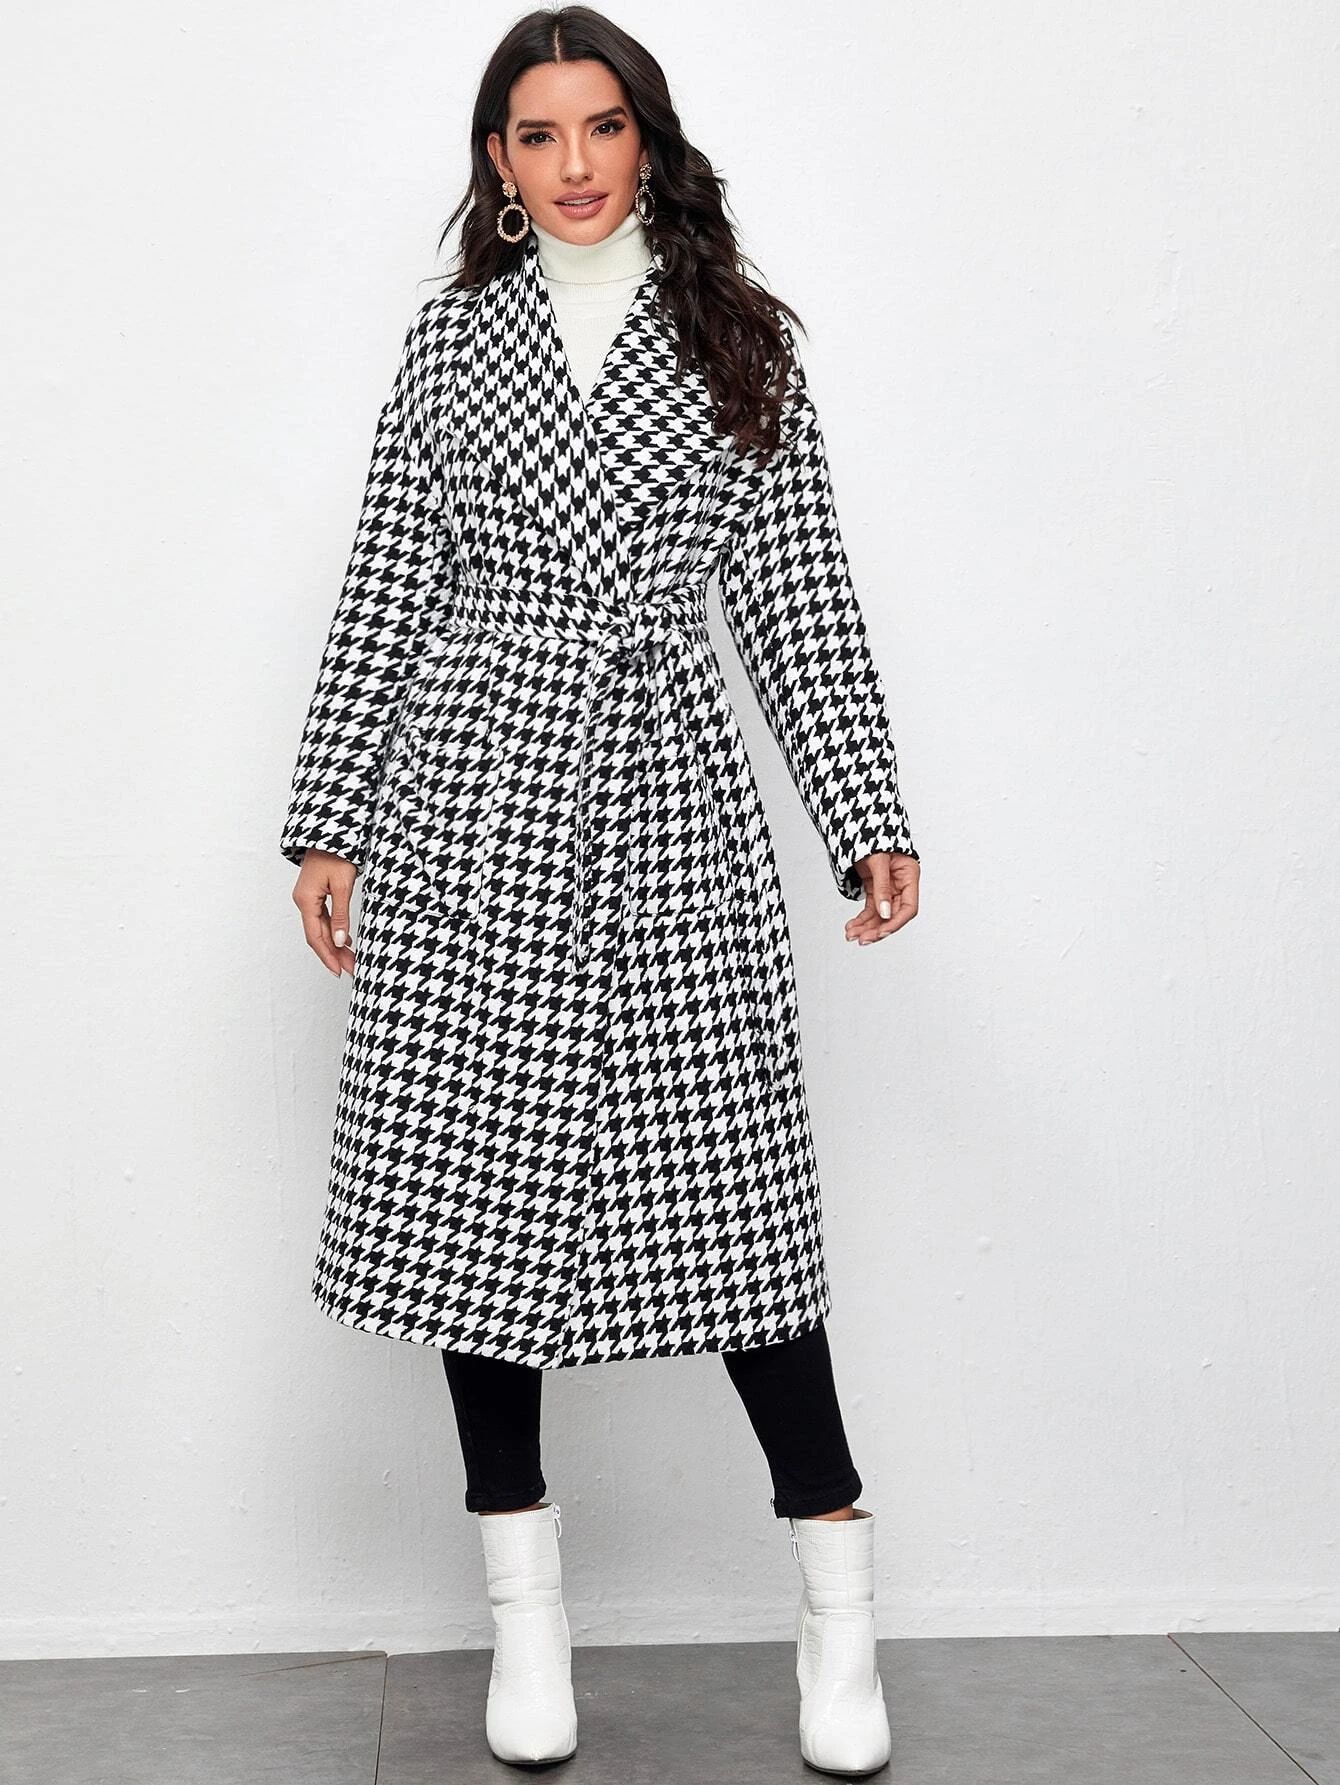 SHEIN Waterfall Collar Pocket Patched Self Belted Houndstooth Coat | SHEIN